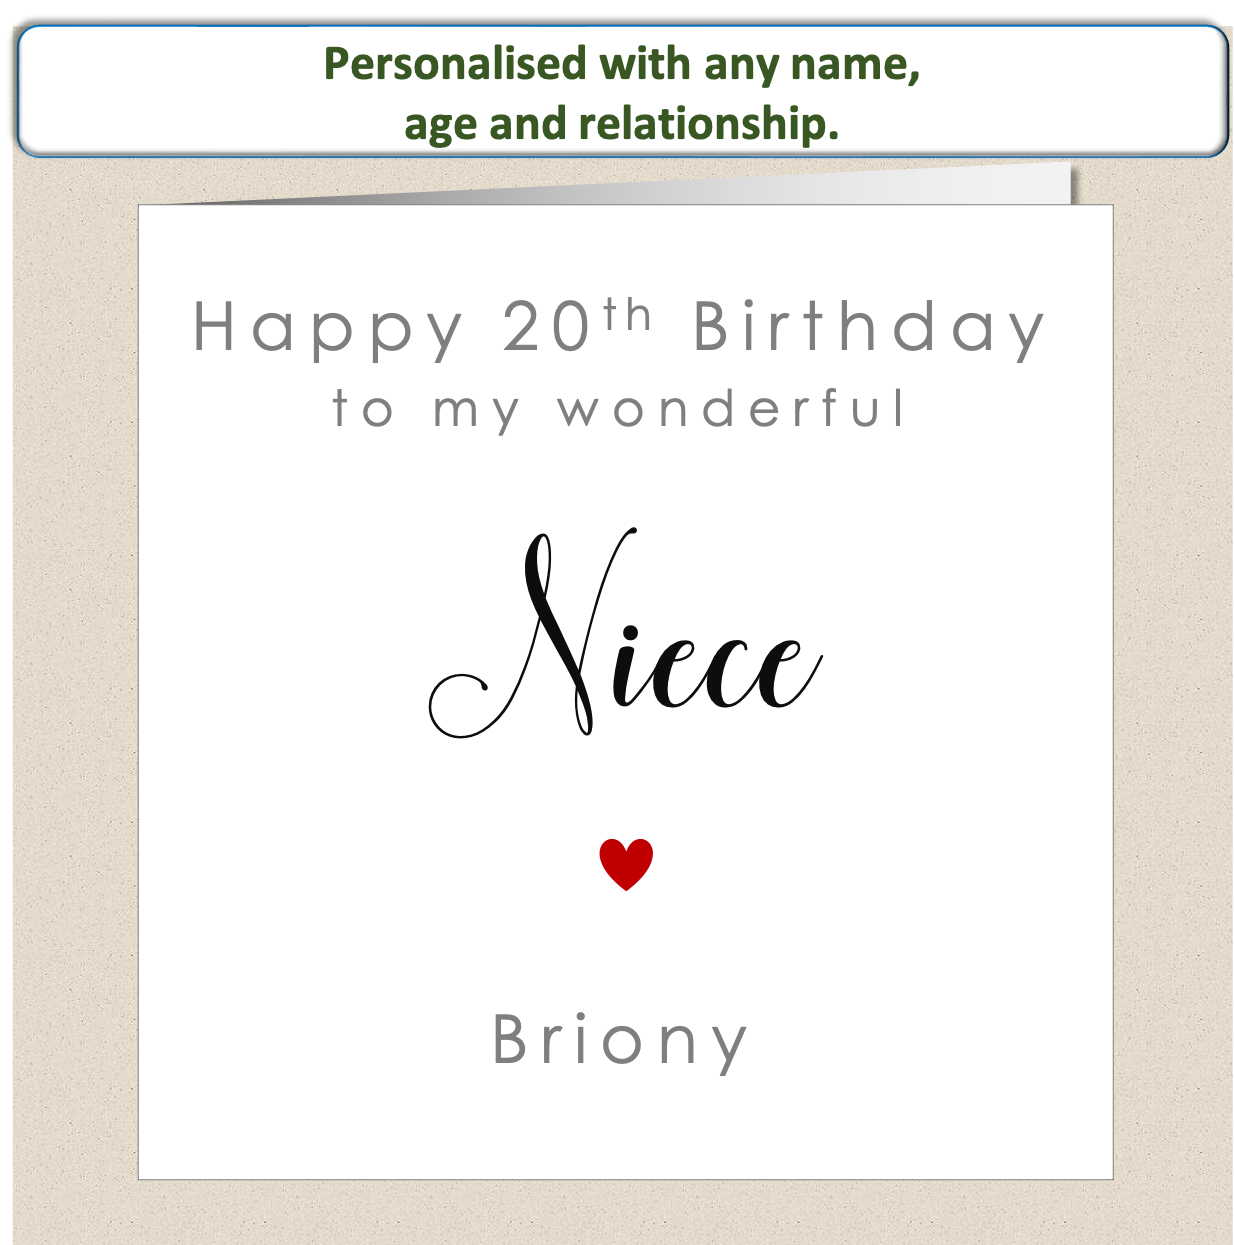 Personalised Female Birthday Card - Relationship - For Her